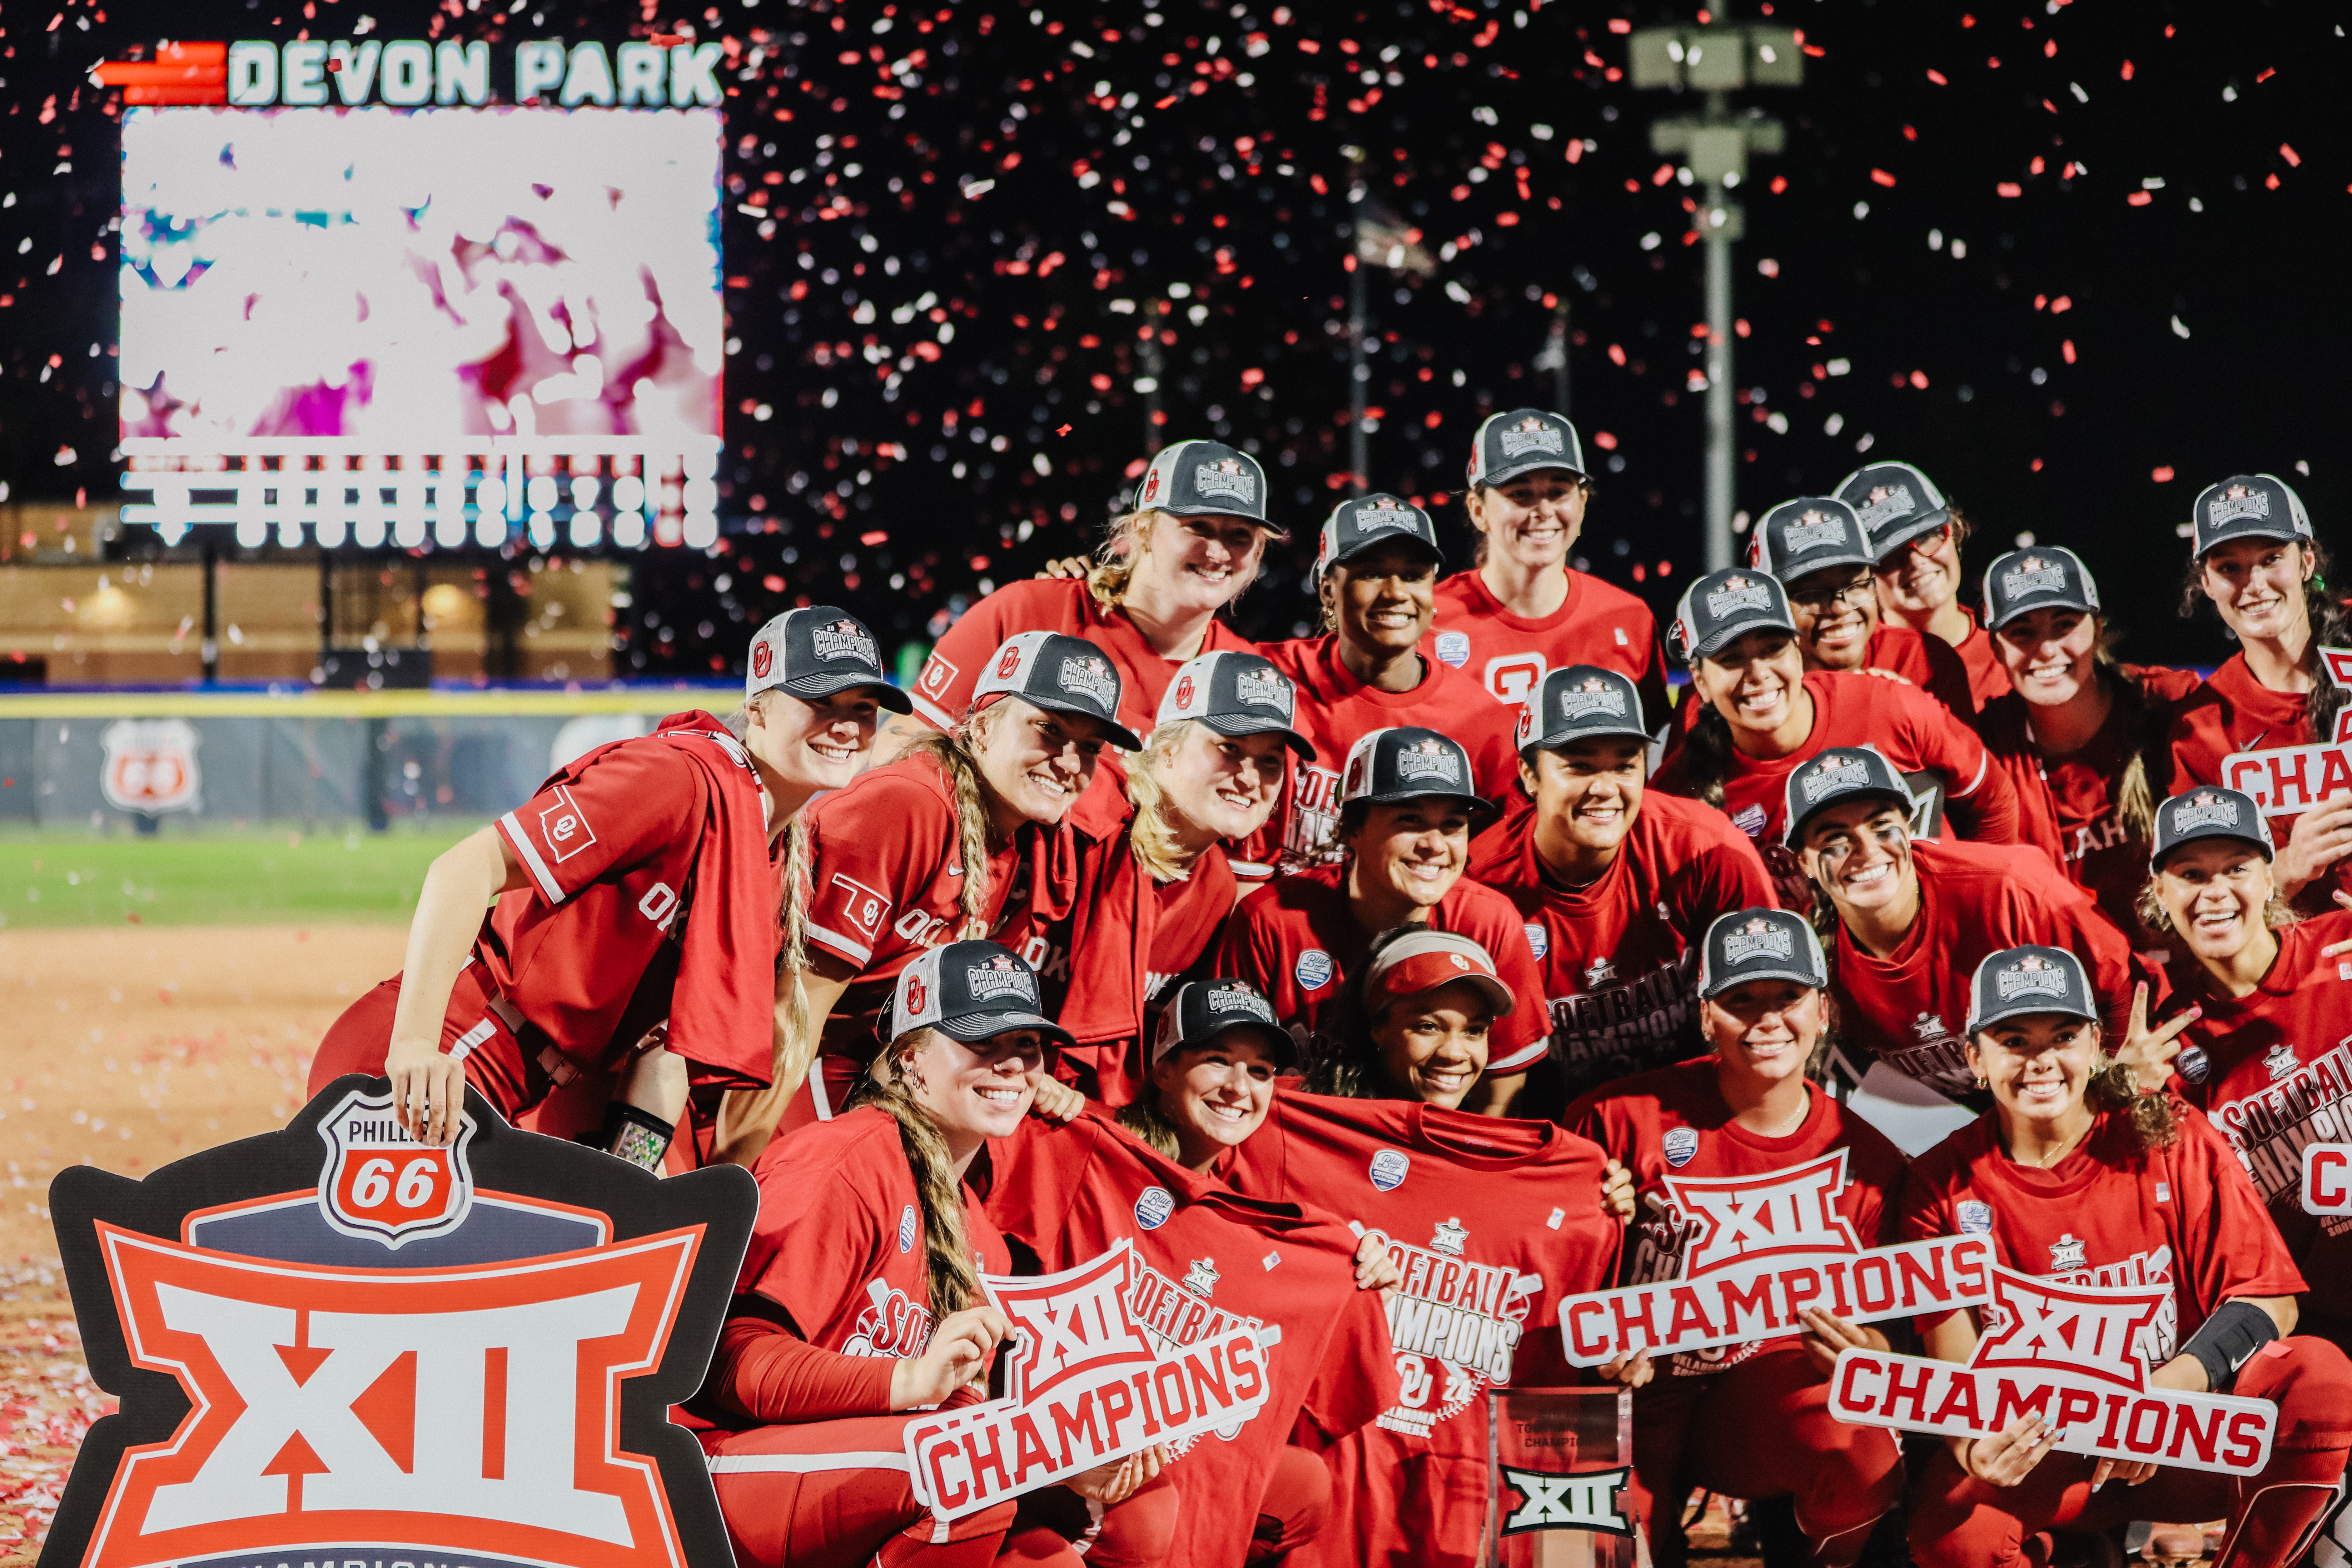 Sooners Go Down in History as First Ever Champions at Devon Park   featured image